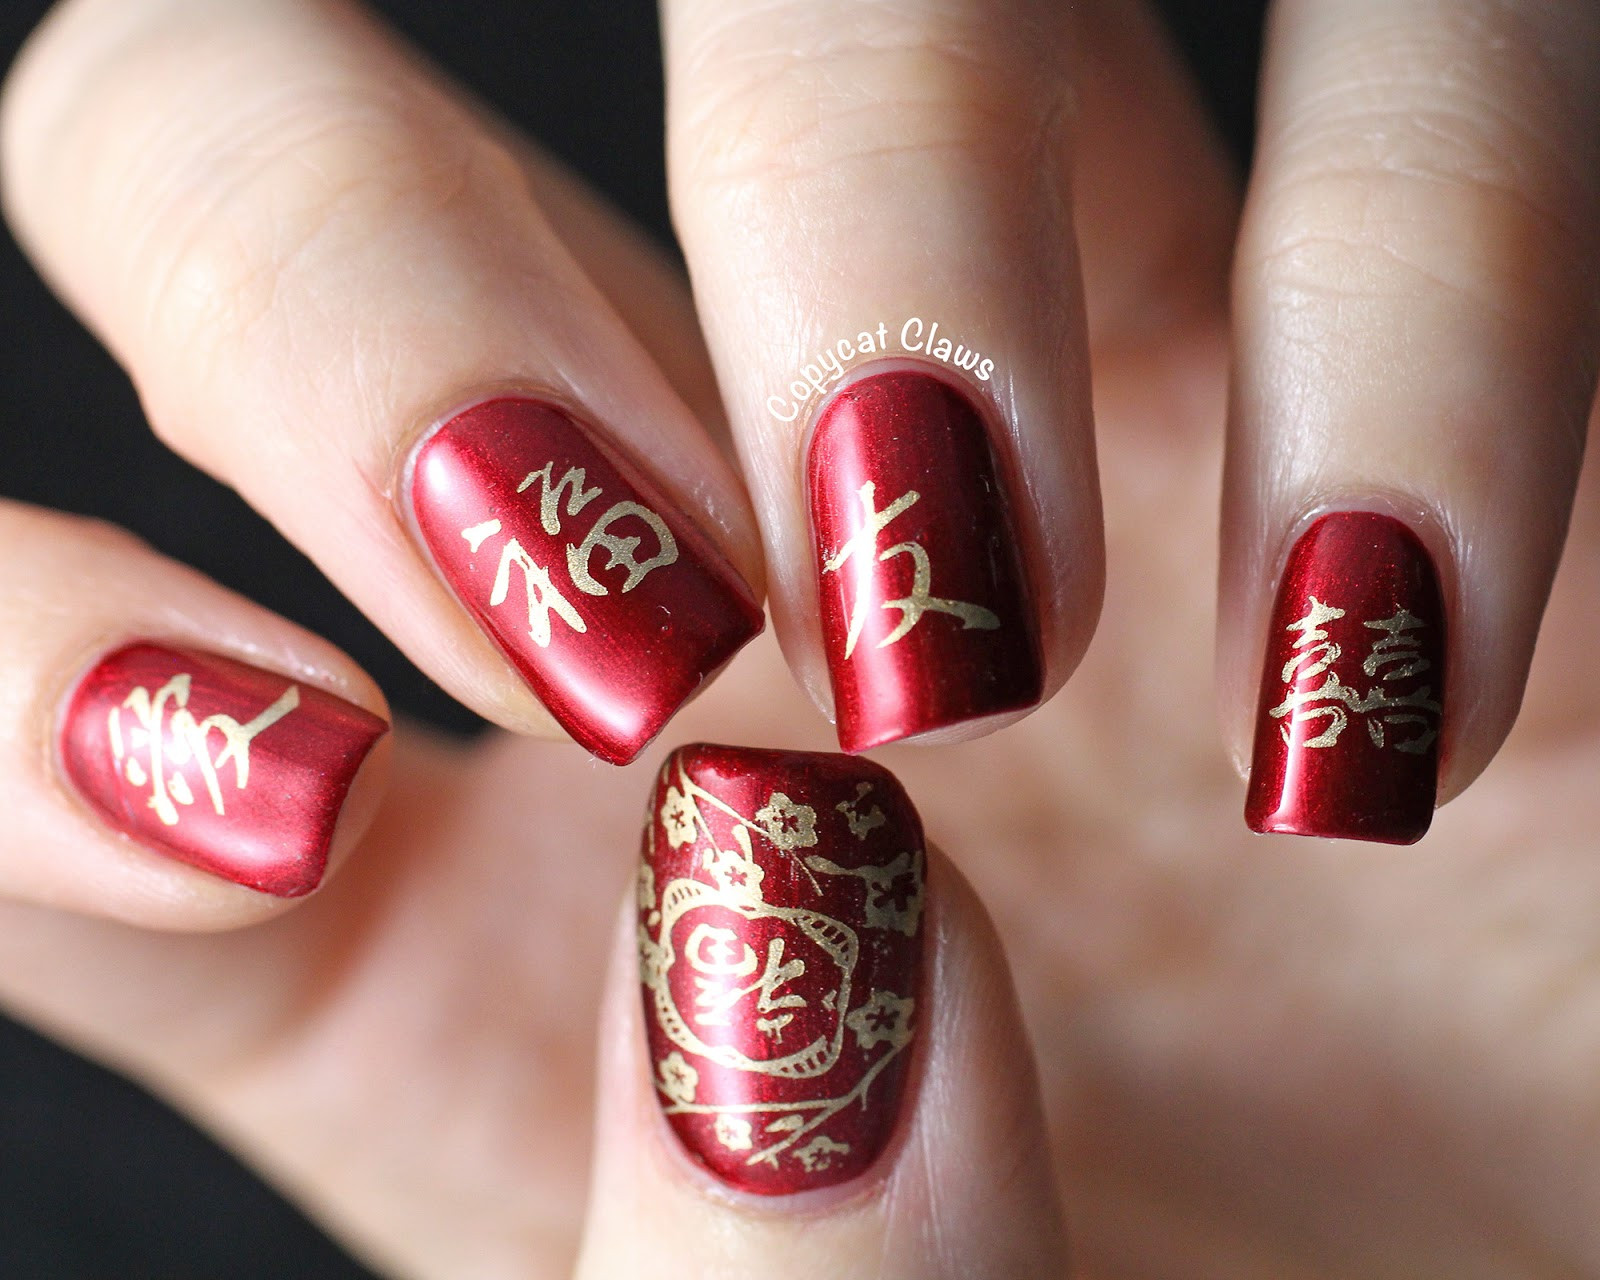 8. "Gelish Nail Designs for Chinese New Year" - wide 1